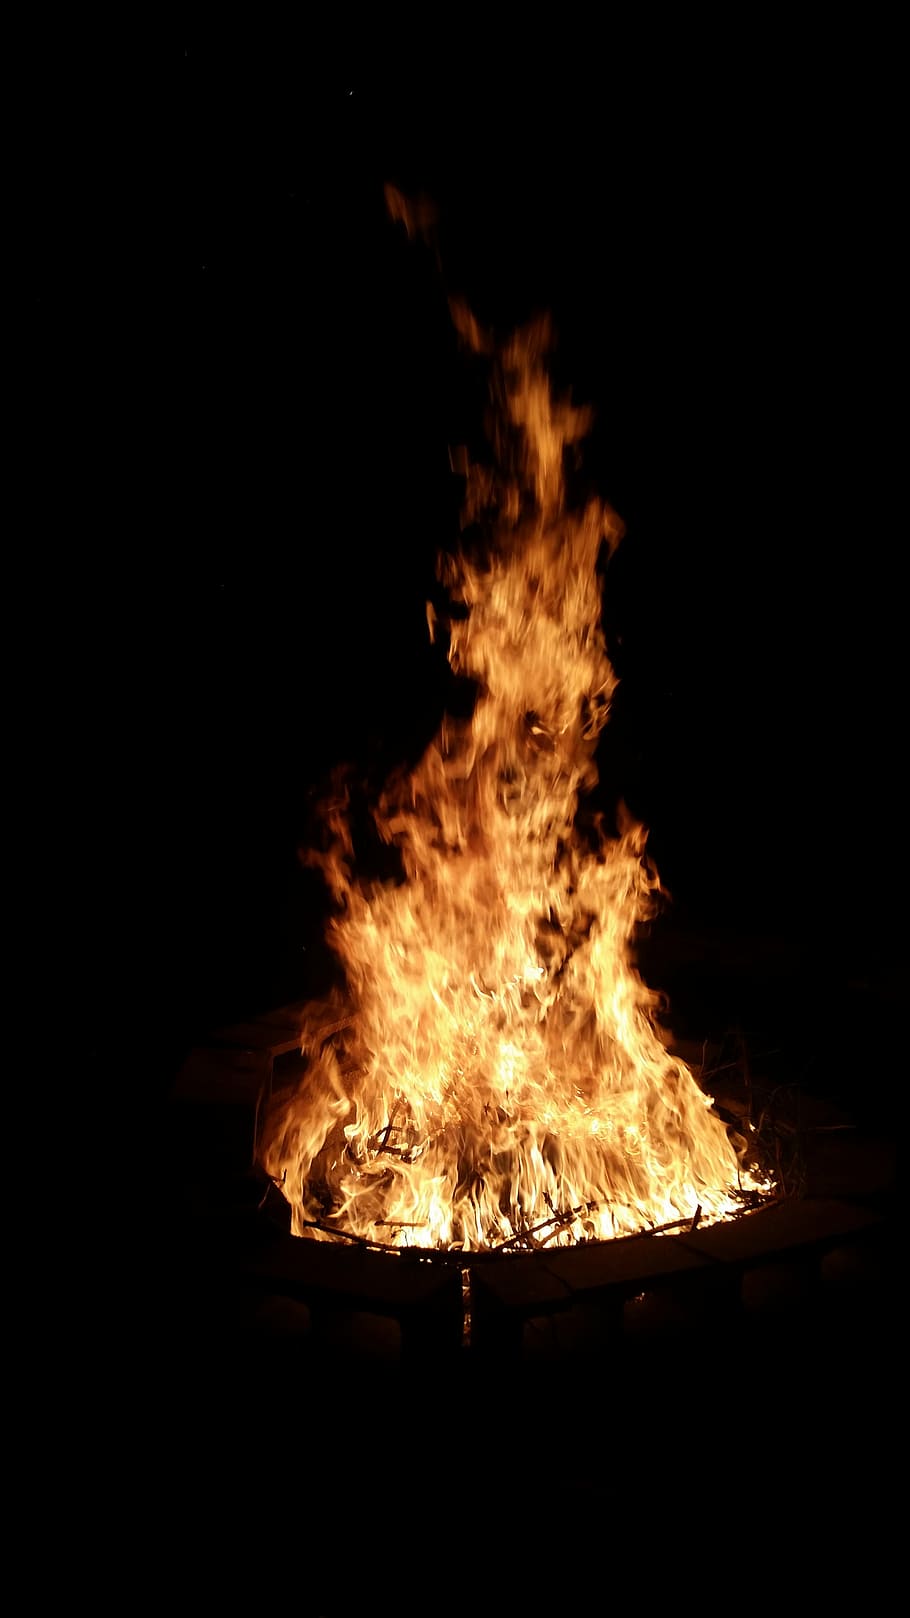 fire, campfire, flames, bonfire, fireplace, fire - Natural Phenomenon, heat - Temperature, flame, burning, red